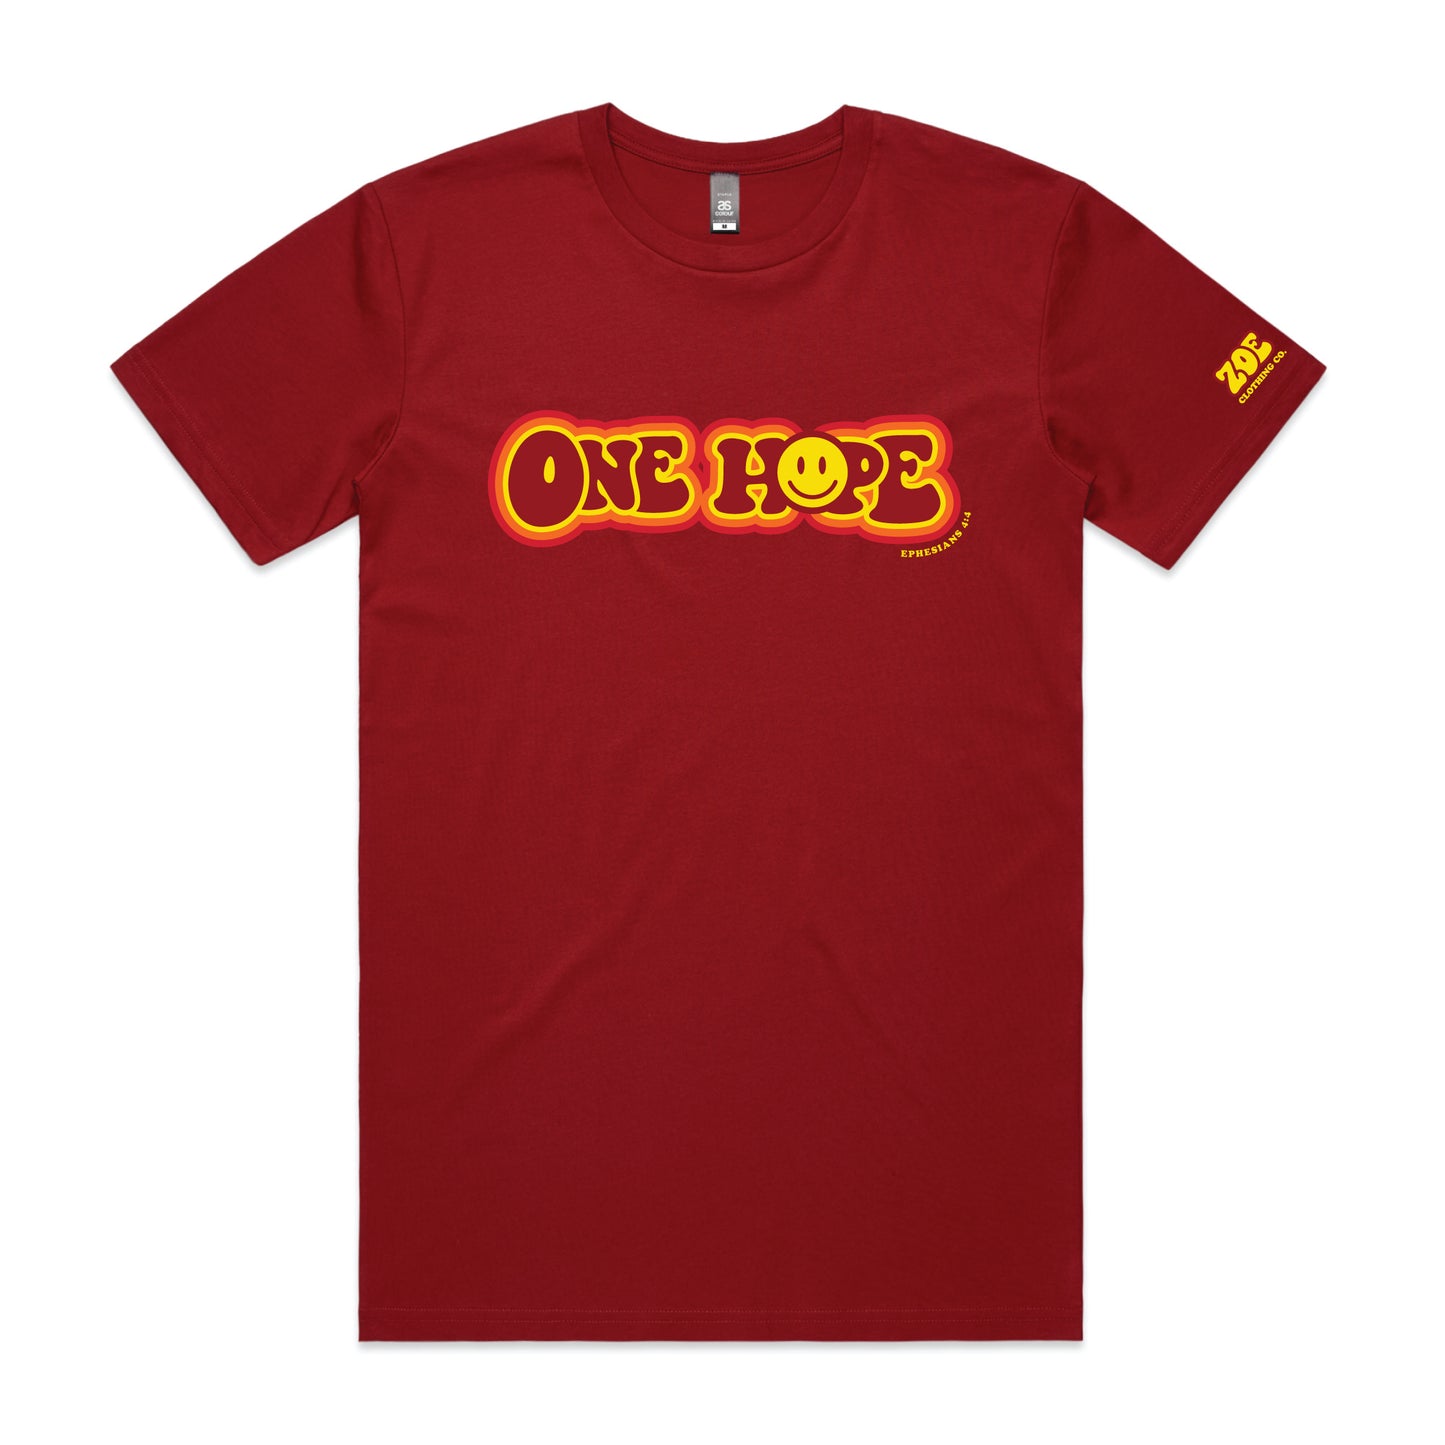 One Hope (Unisex and Youth)